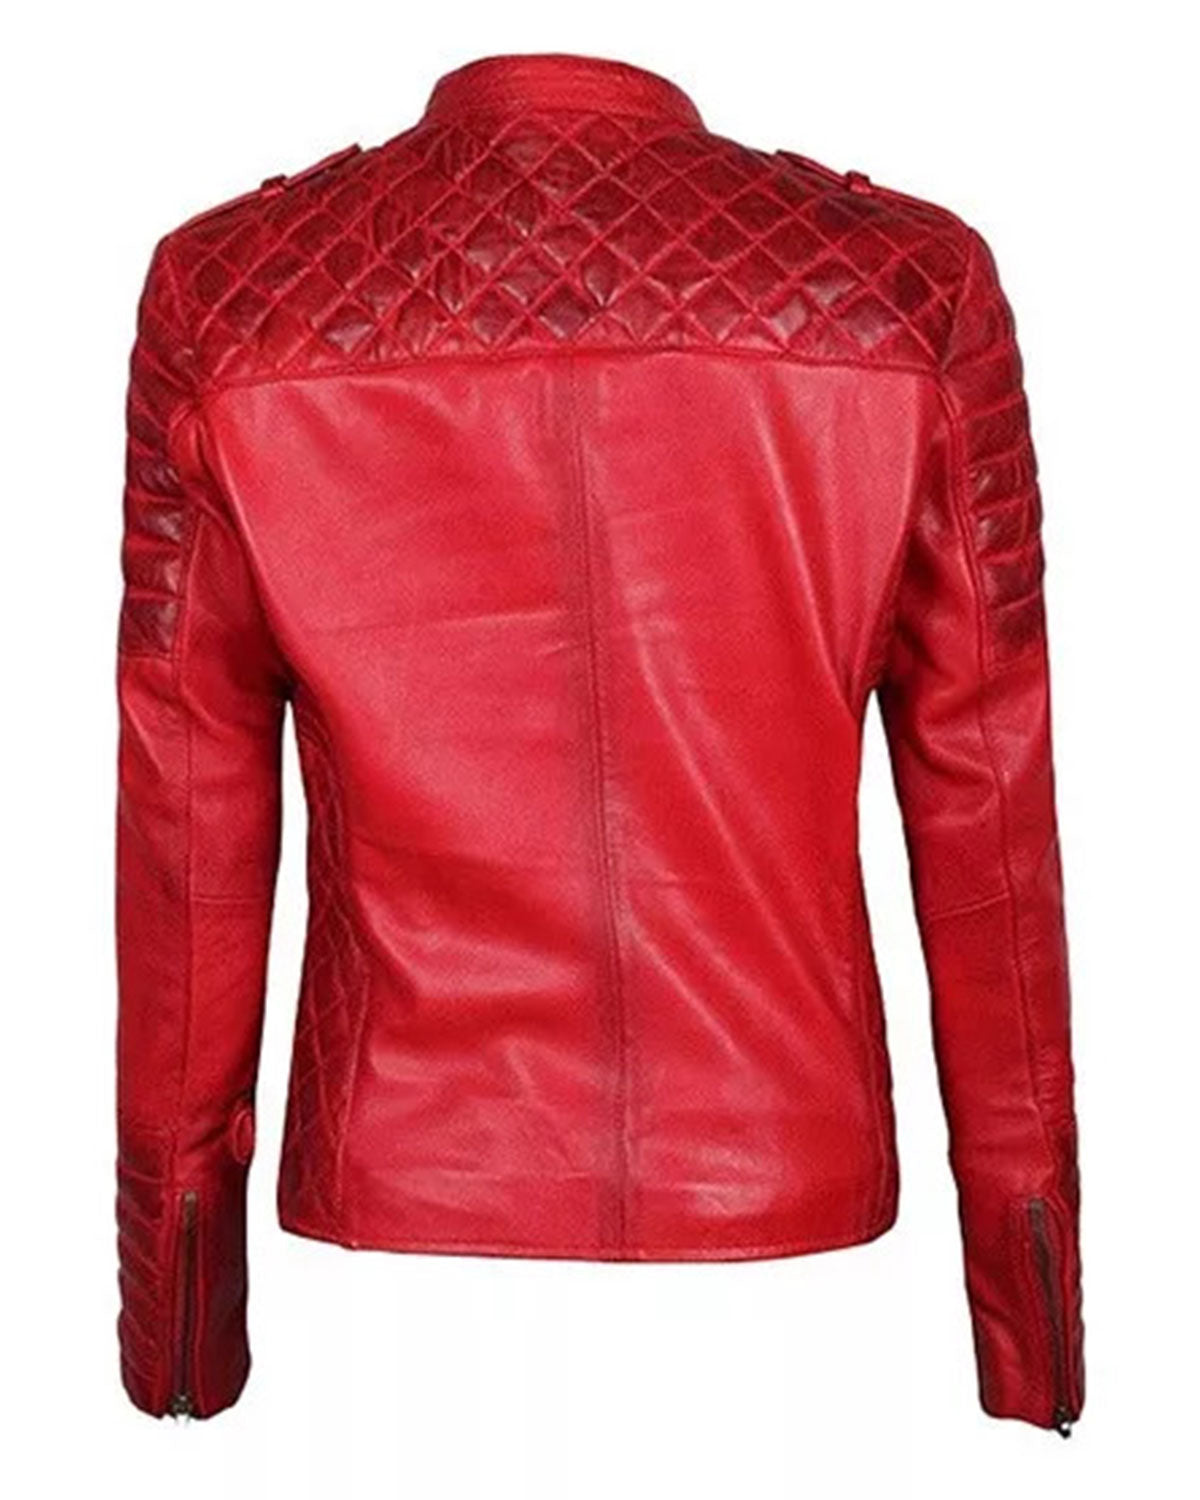 Womens Quilted Merlot Red Leather Biker Jacket